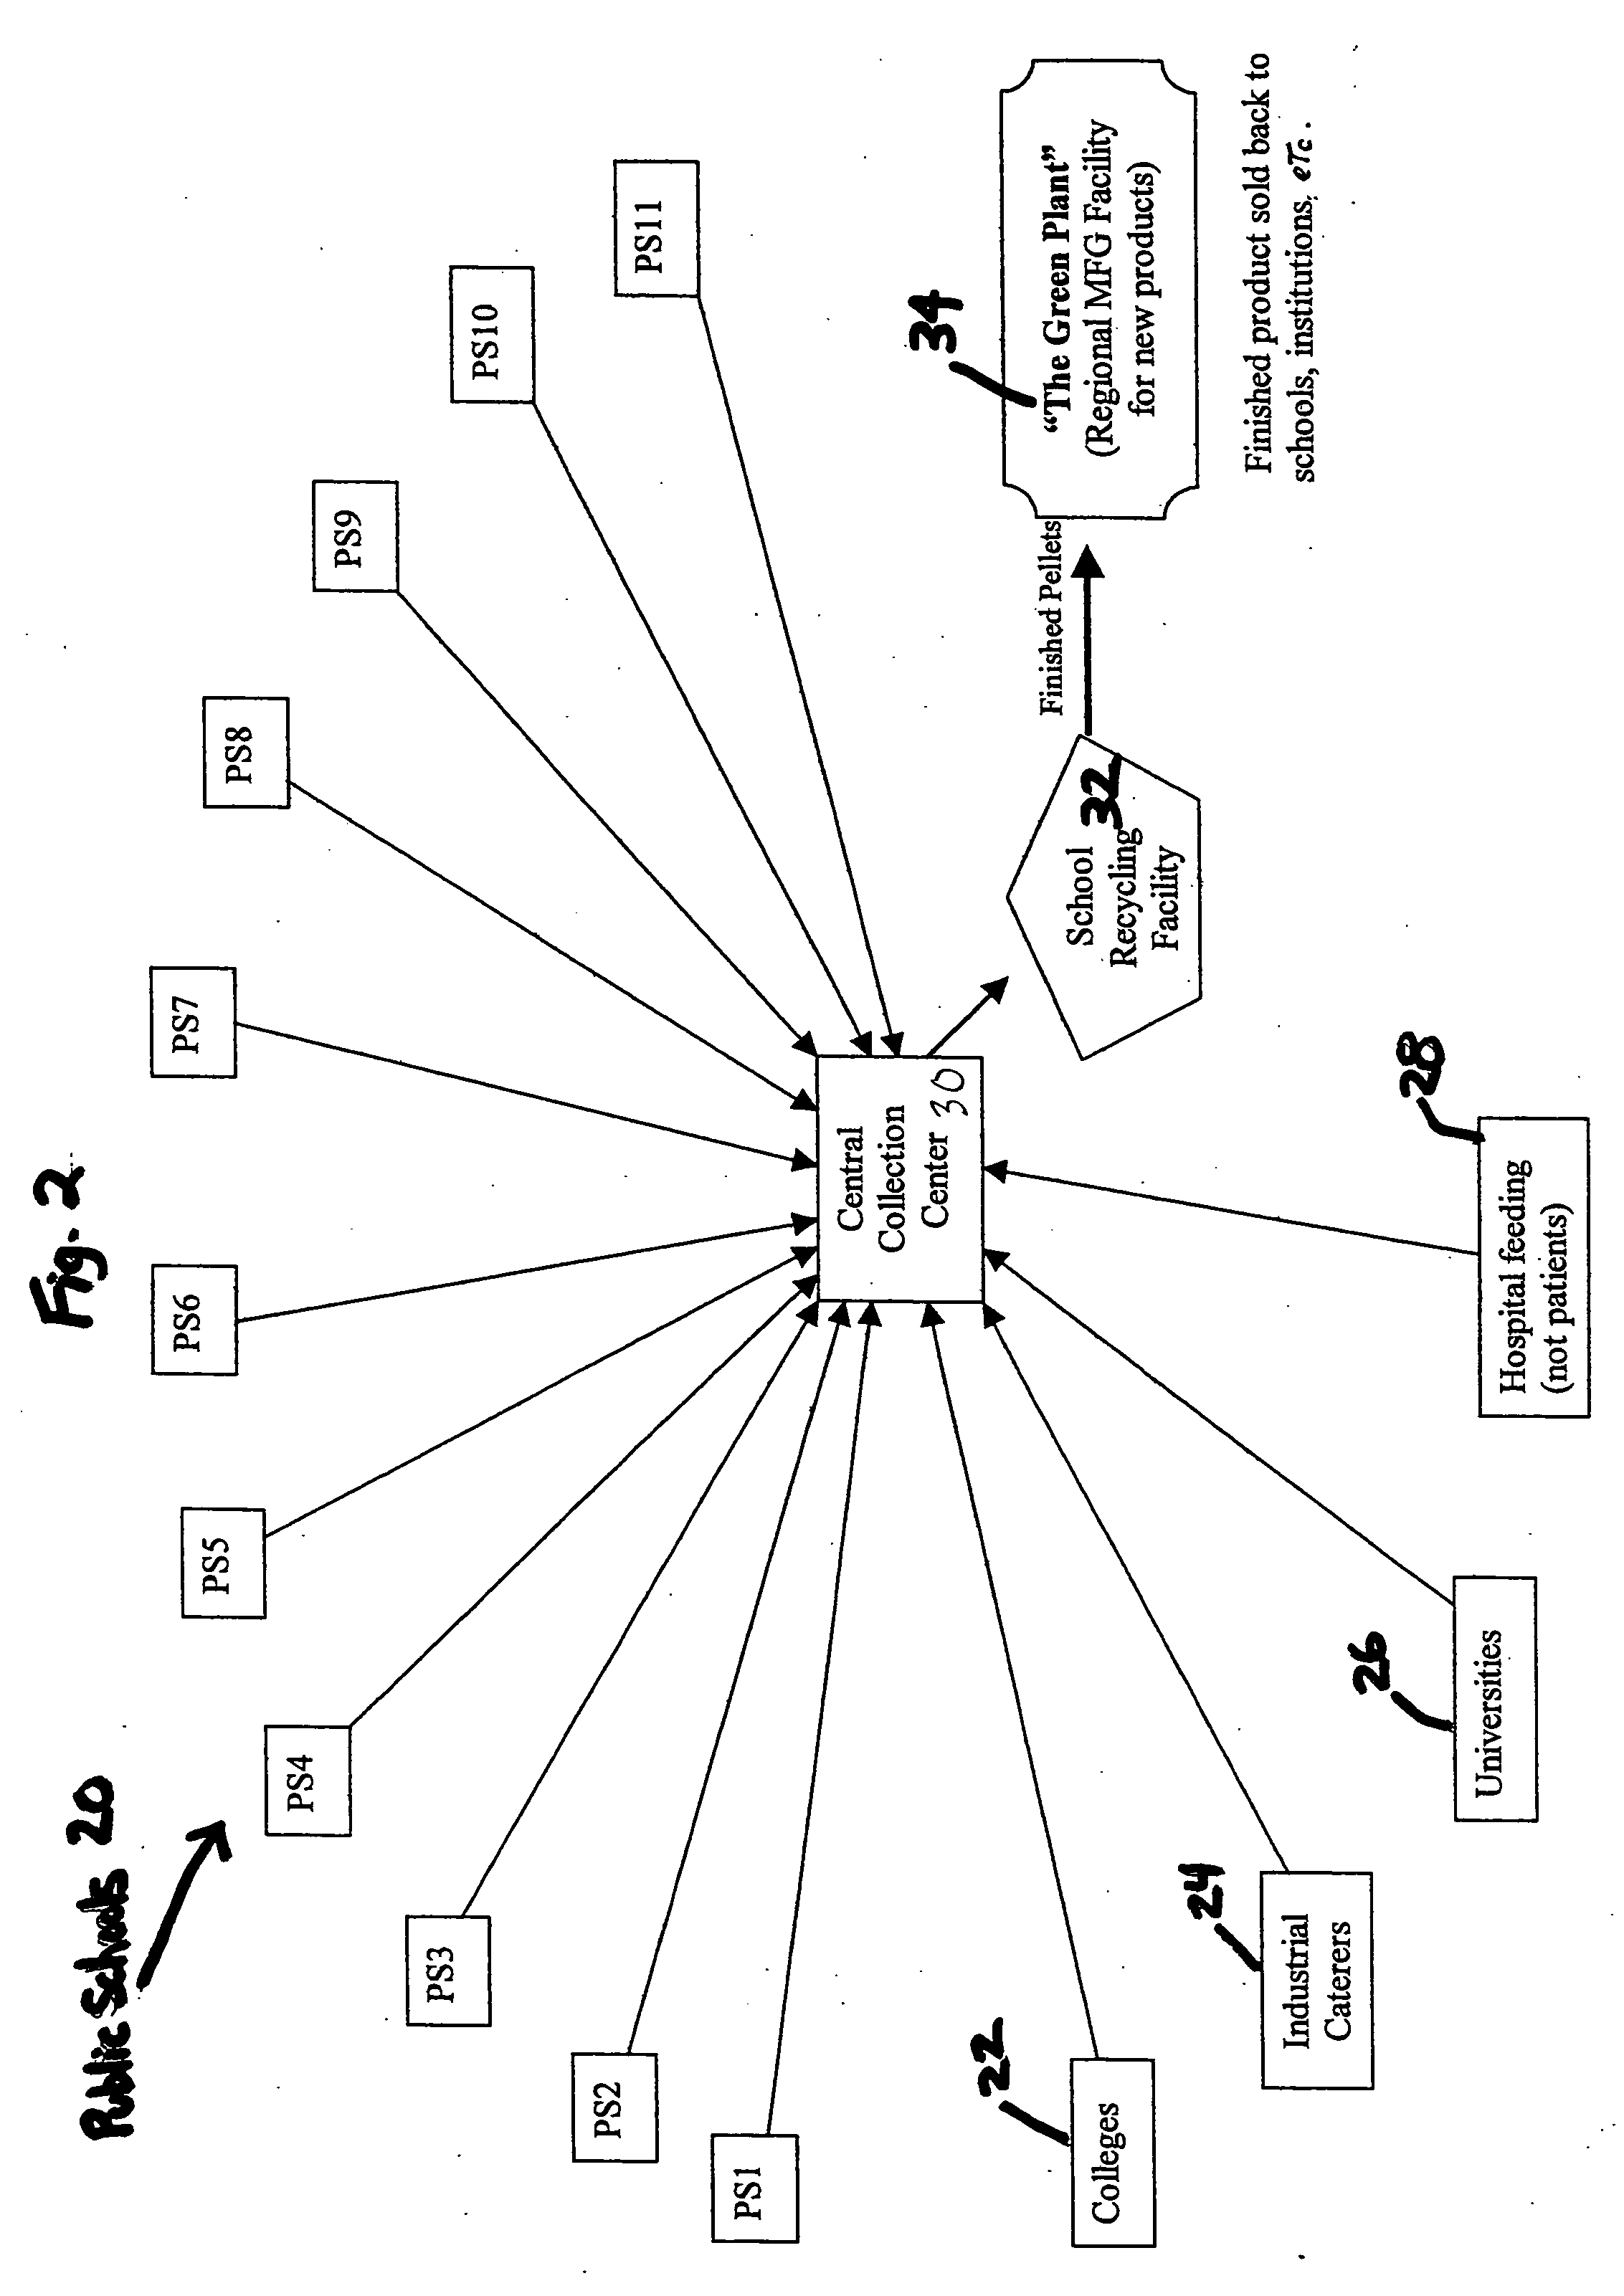 Closed-loop control system for recycling products